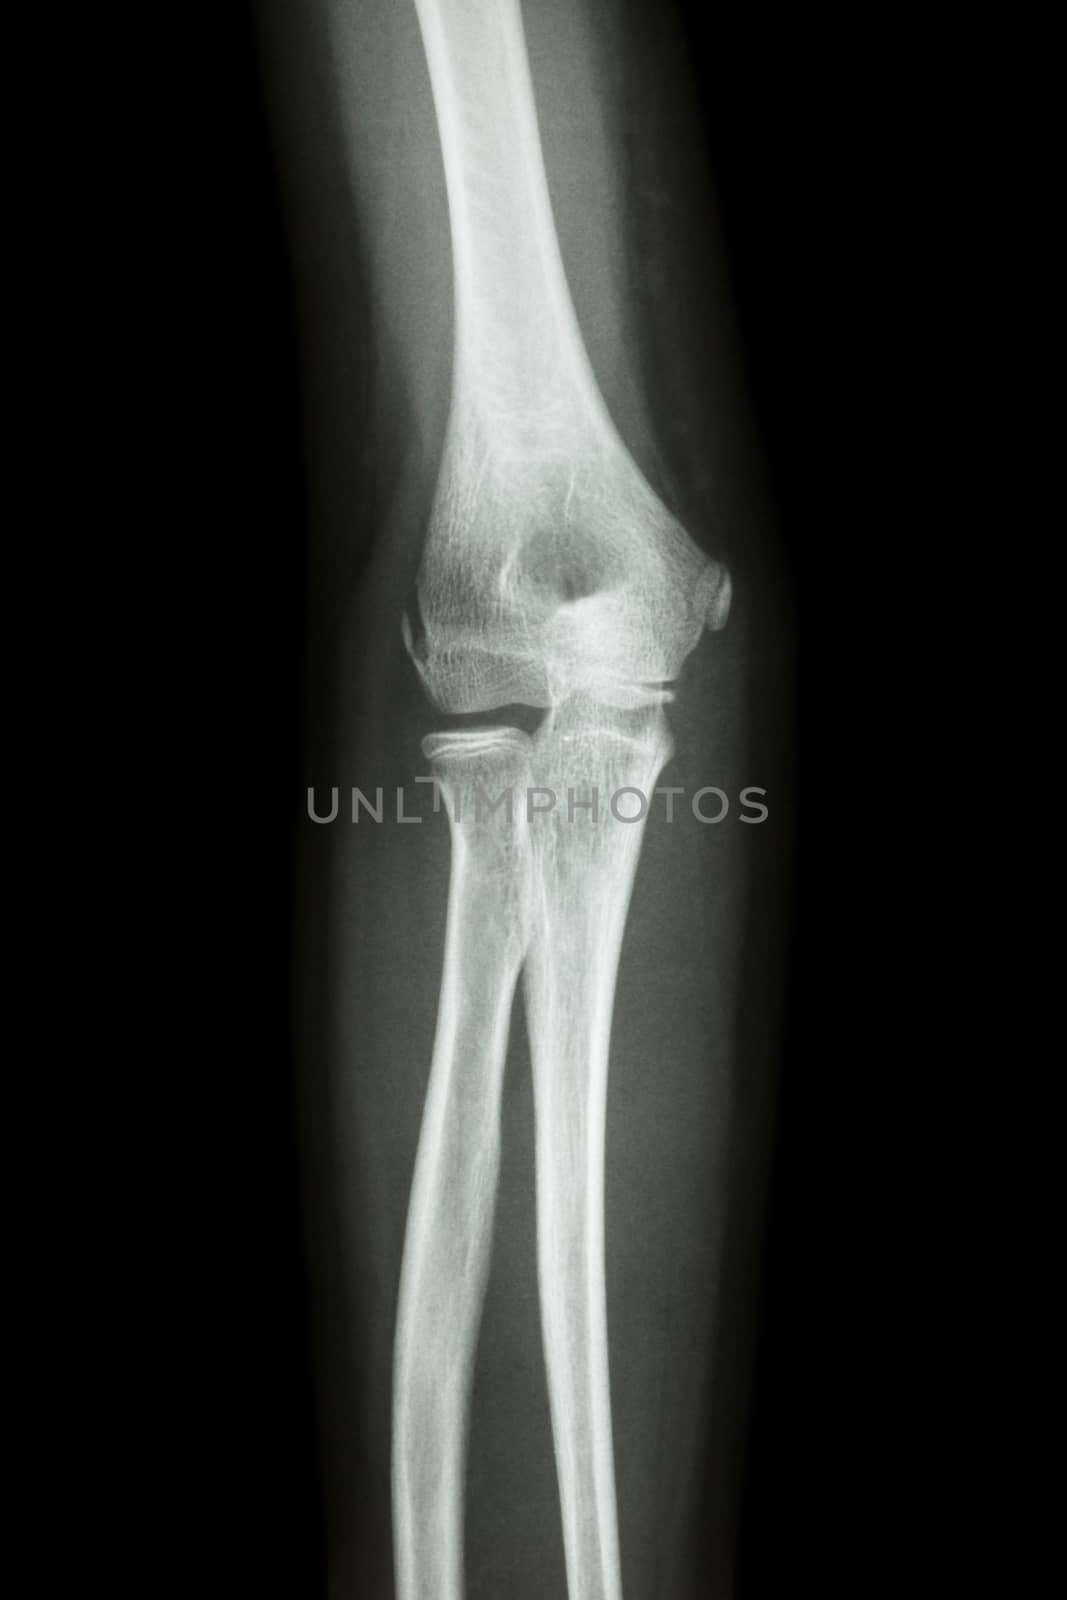 film x-ray elbow AP : show normal human's elbow